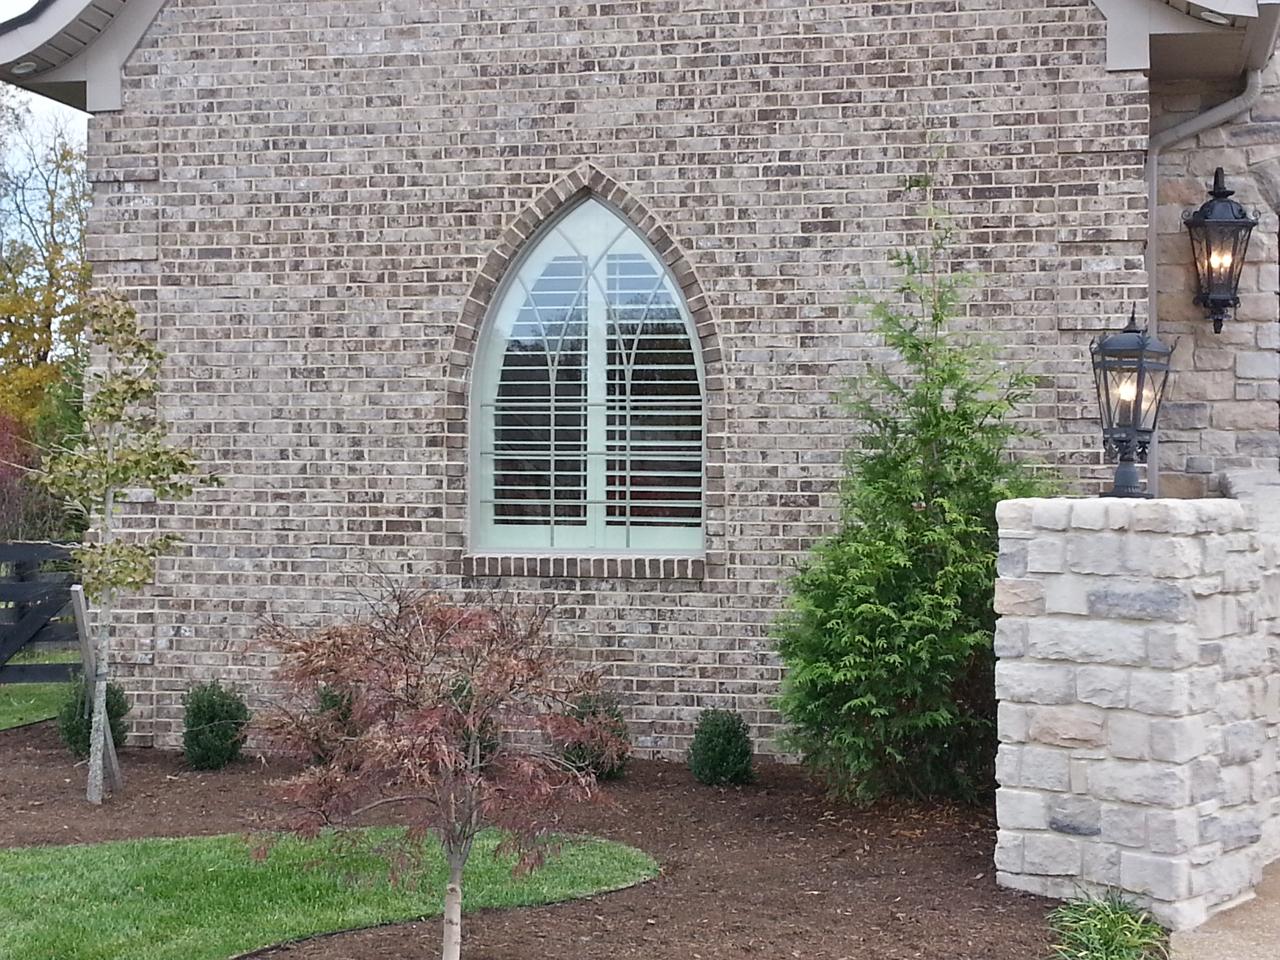 Uniquely shaped window with plantation shutters